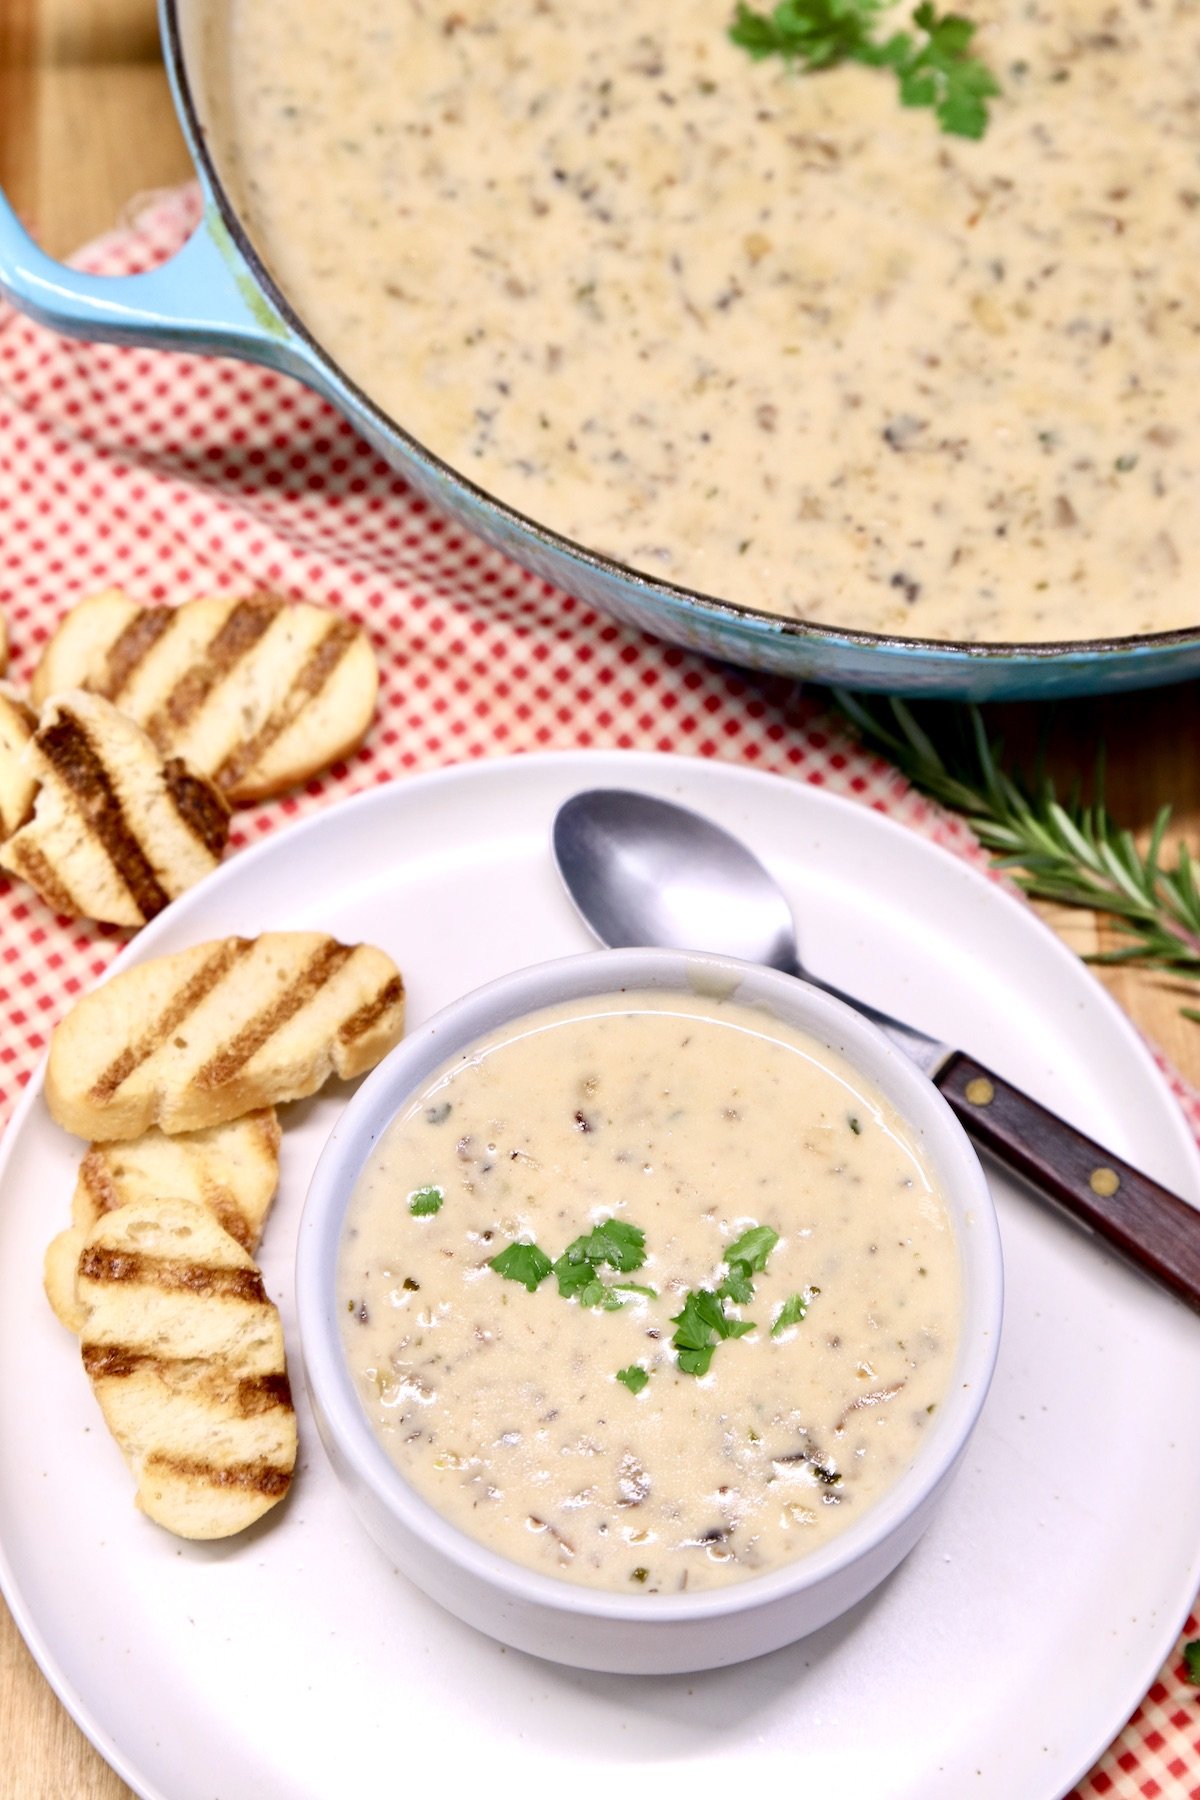 cream of mushroom soup in a bowl on a plate with spoon, toasted bread